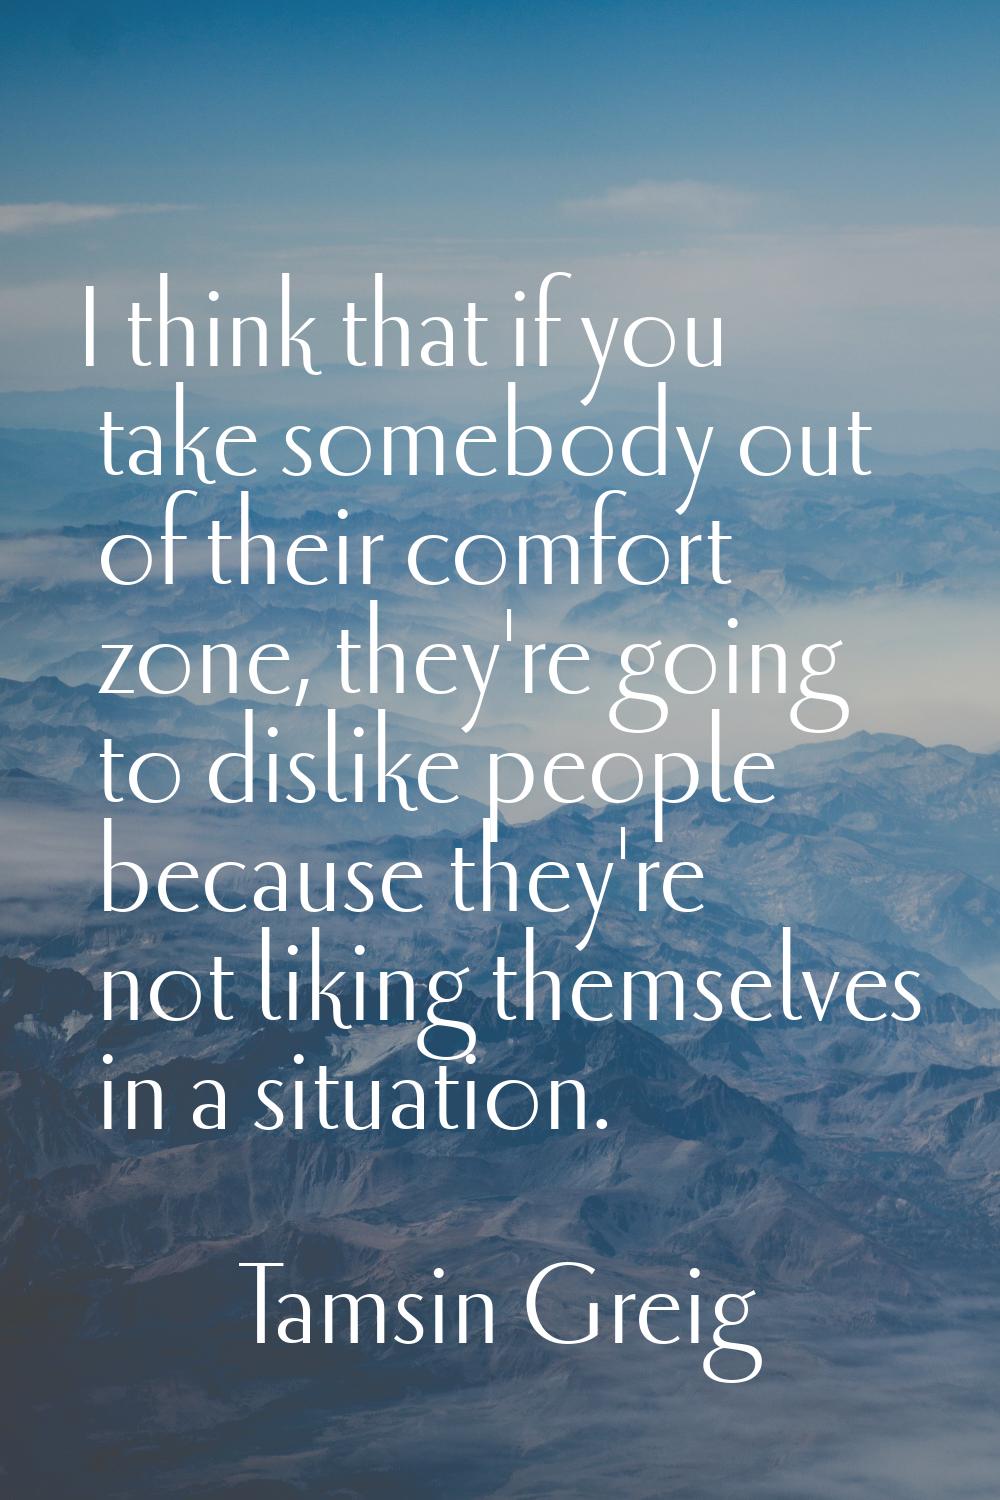 I think that if you take somebody out of their comfort zone, they're going to dislike people becaus